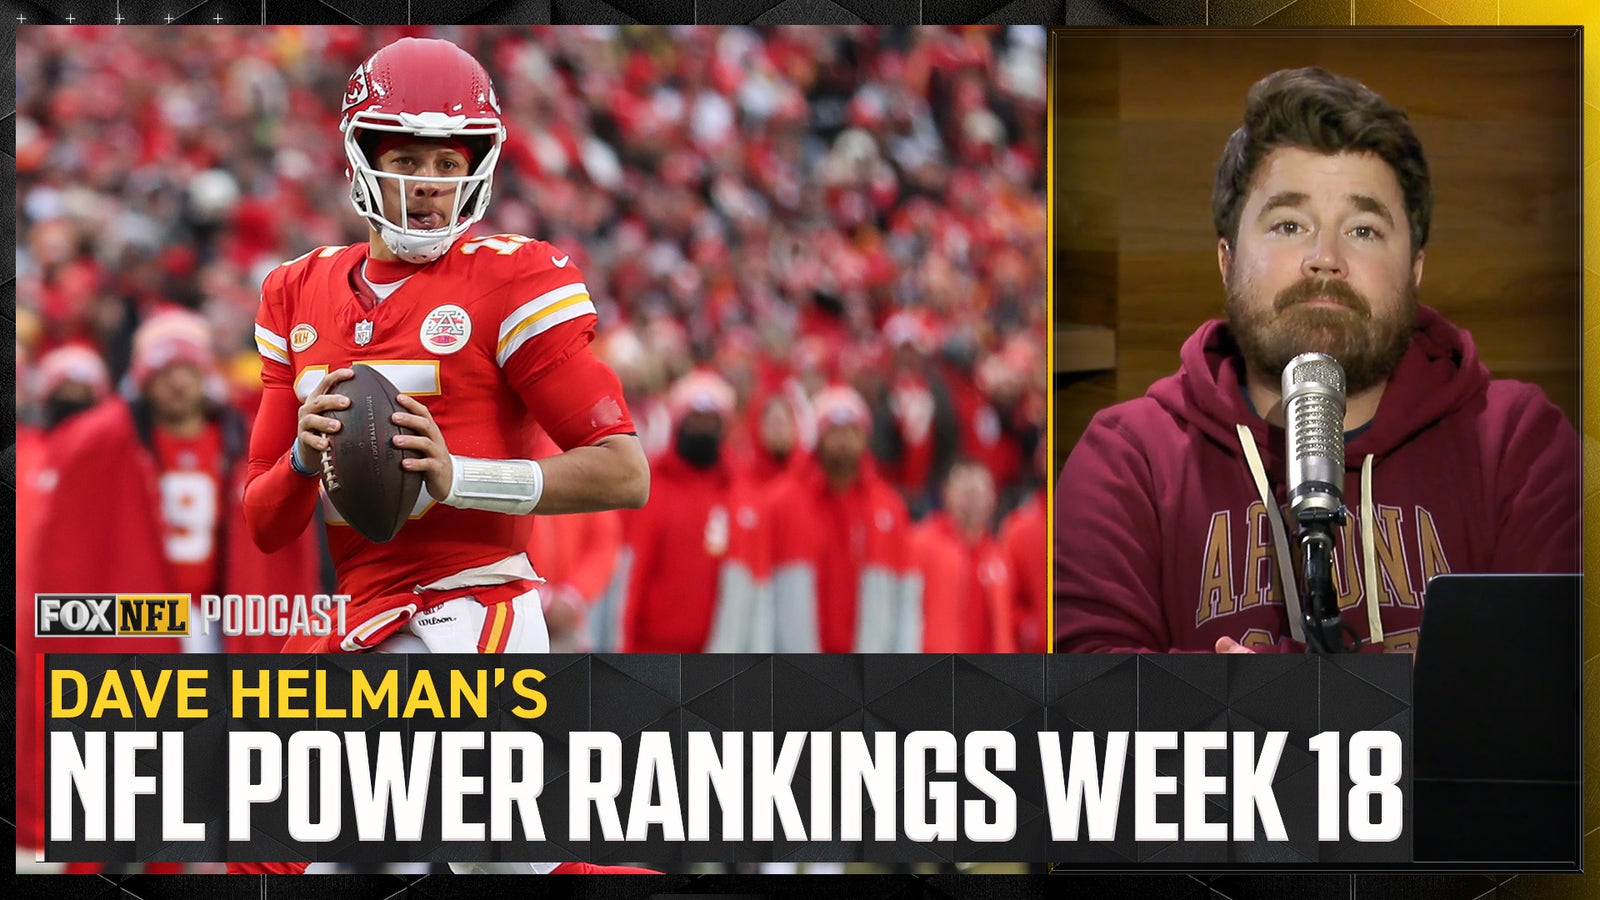 With Week 18 here, Dave Helman reveals his updated NFL power rankings!